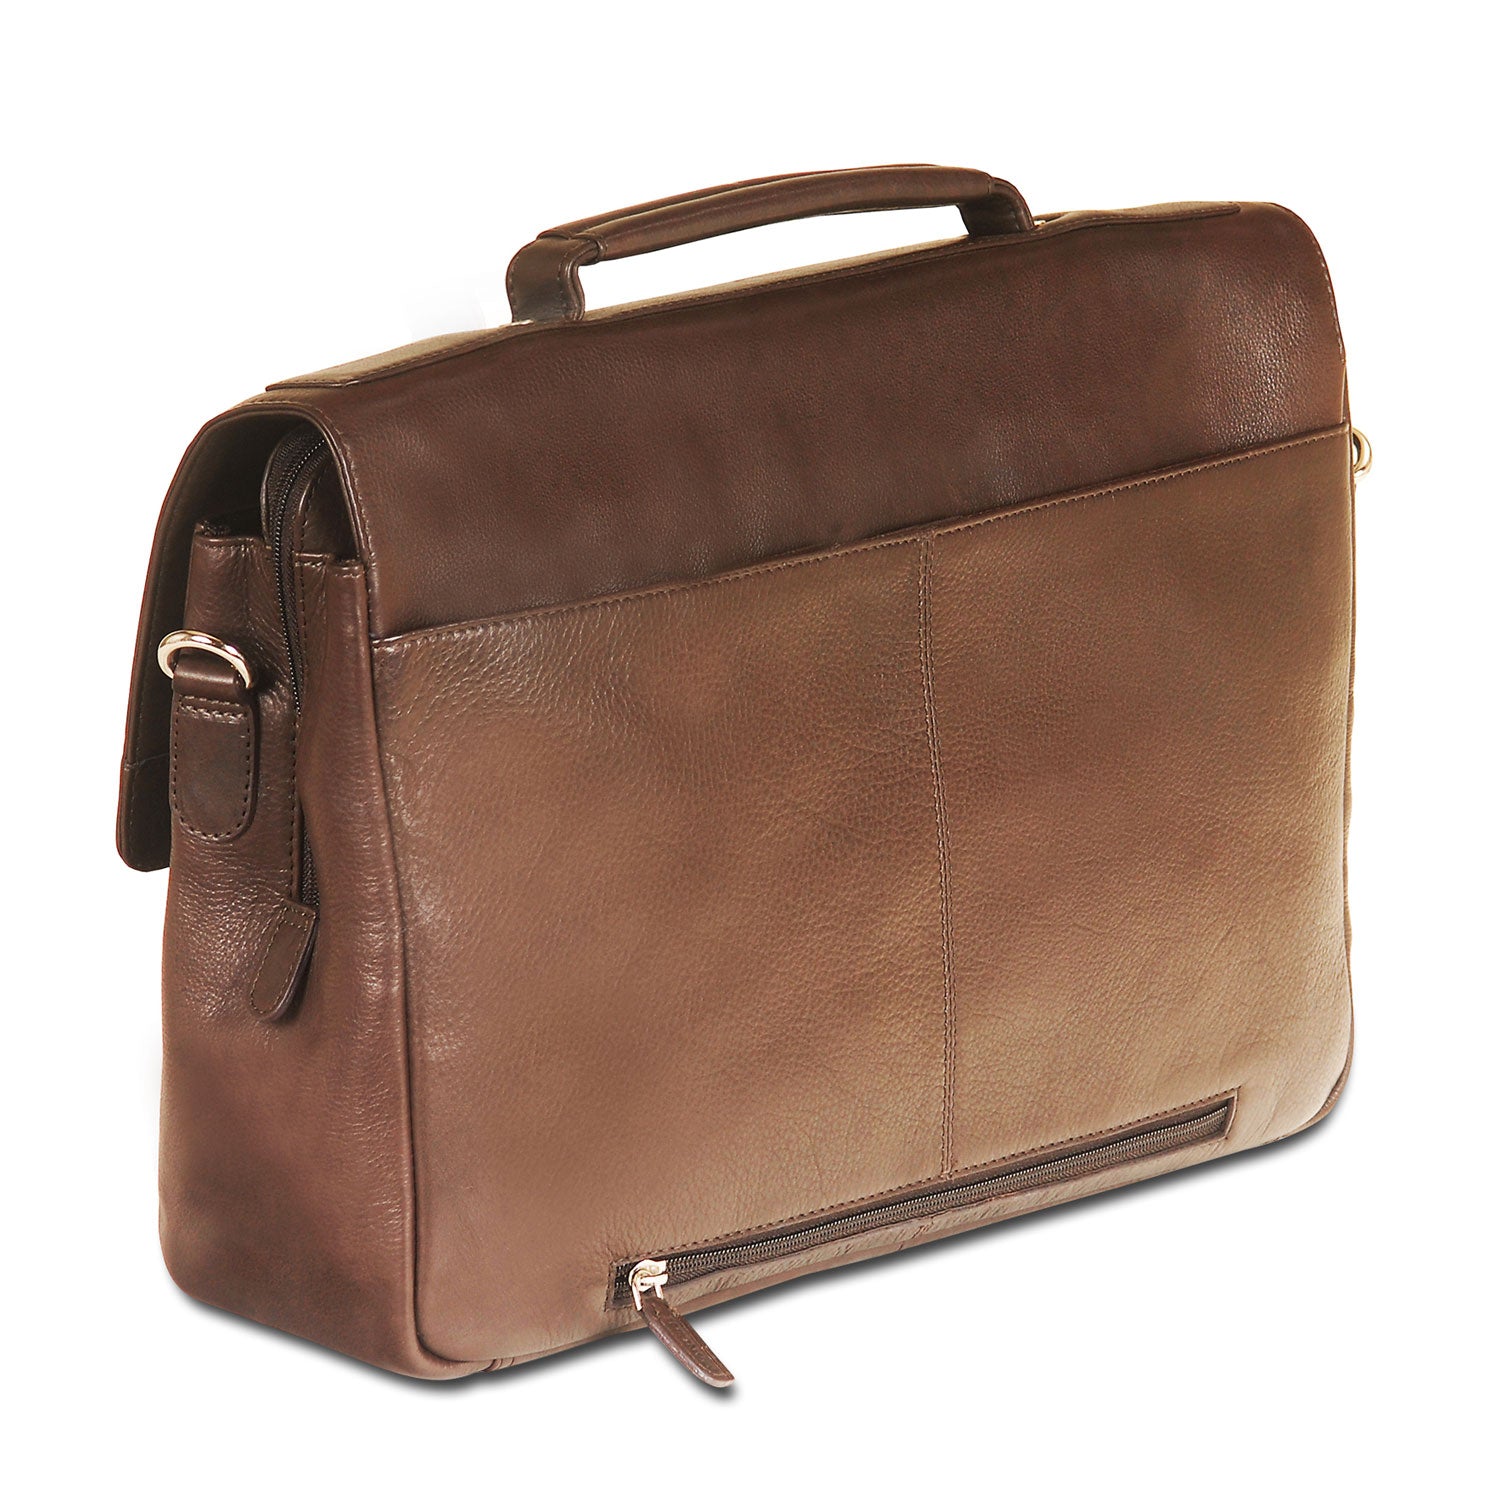 Mancini Leather Triple Compartment Flap Briefcase for 15" Laptop / Tablet, 15" x 4.25" x 10.25", Brown